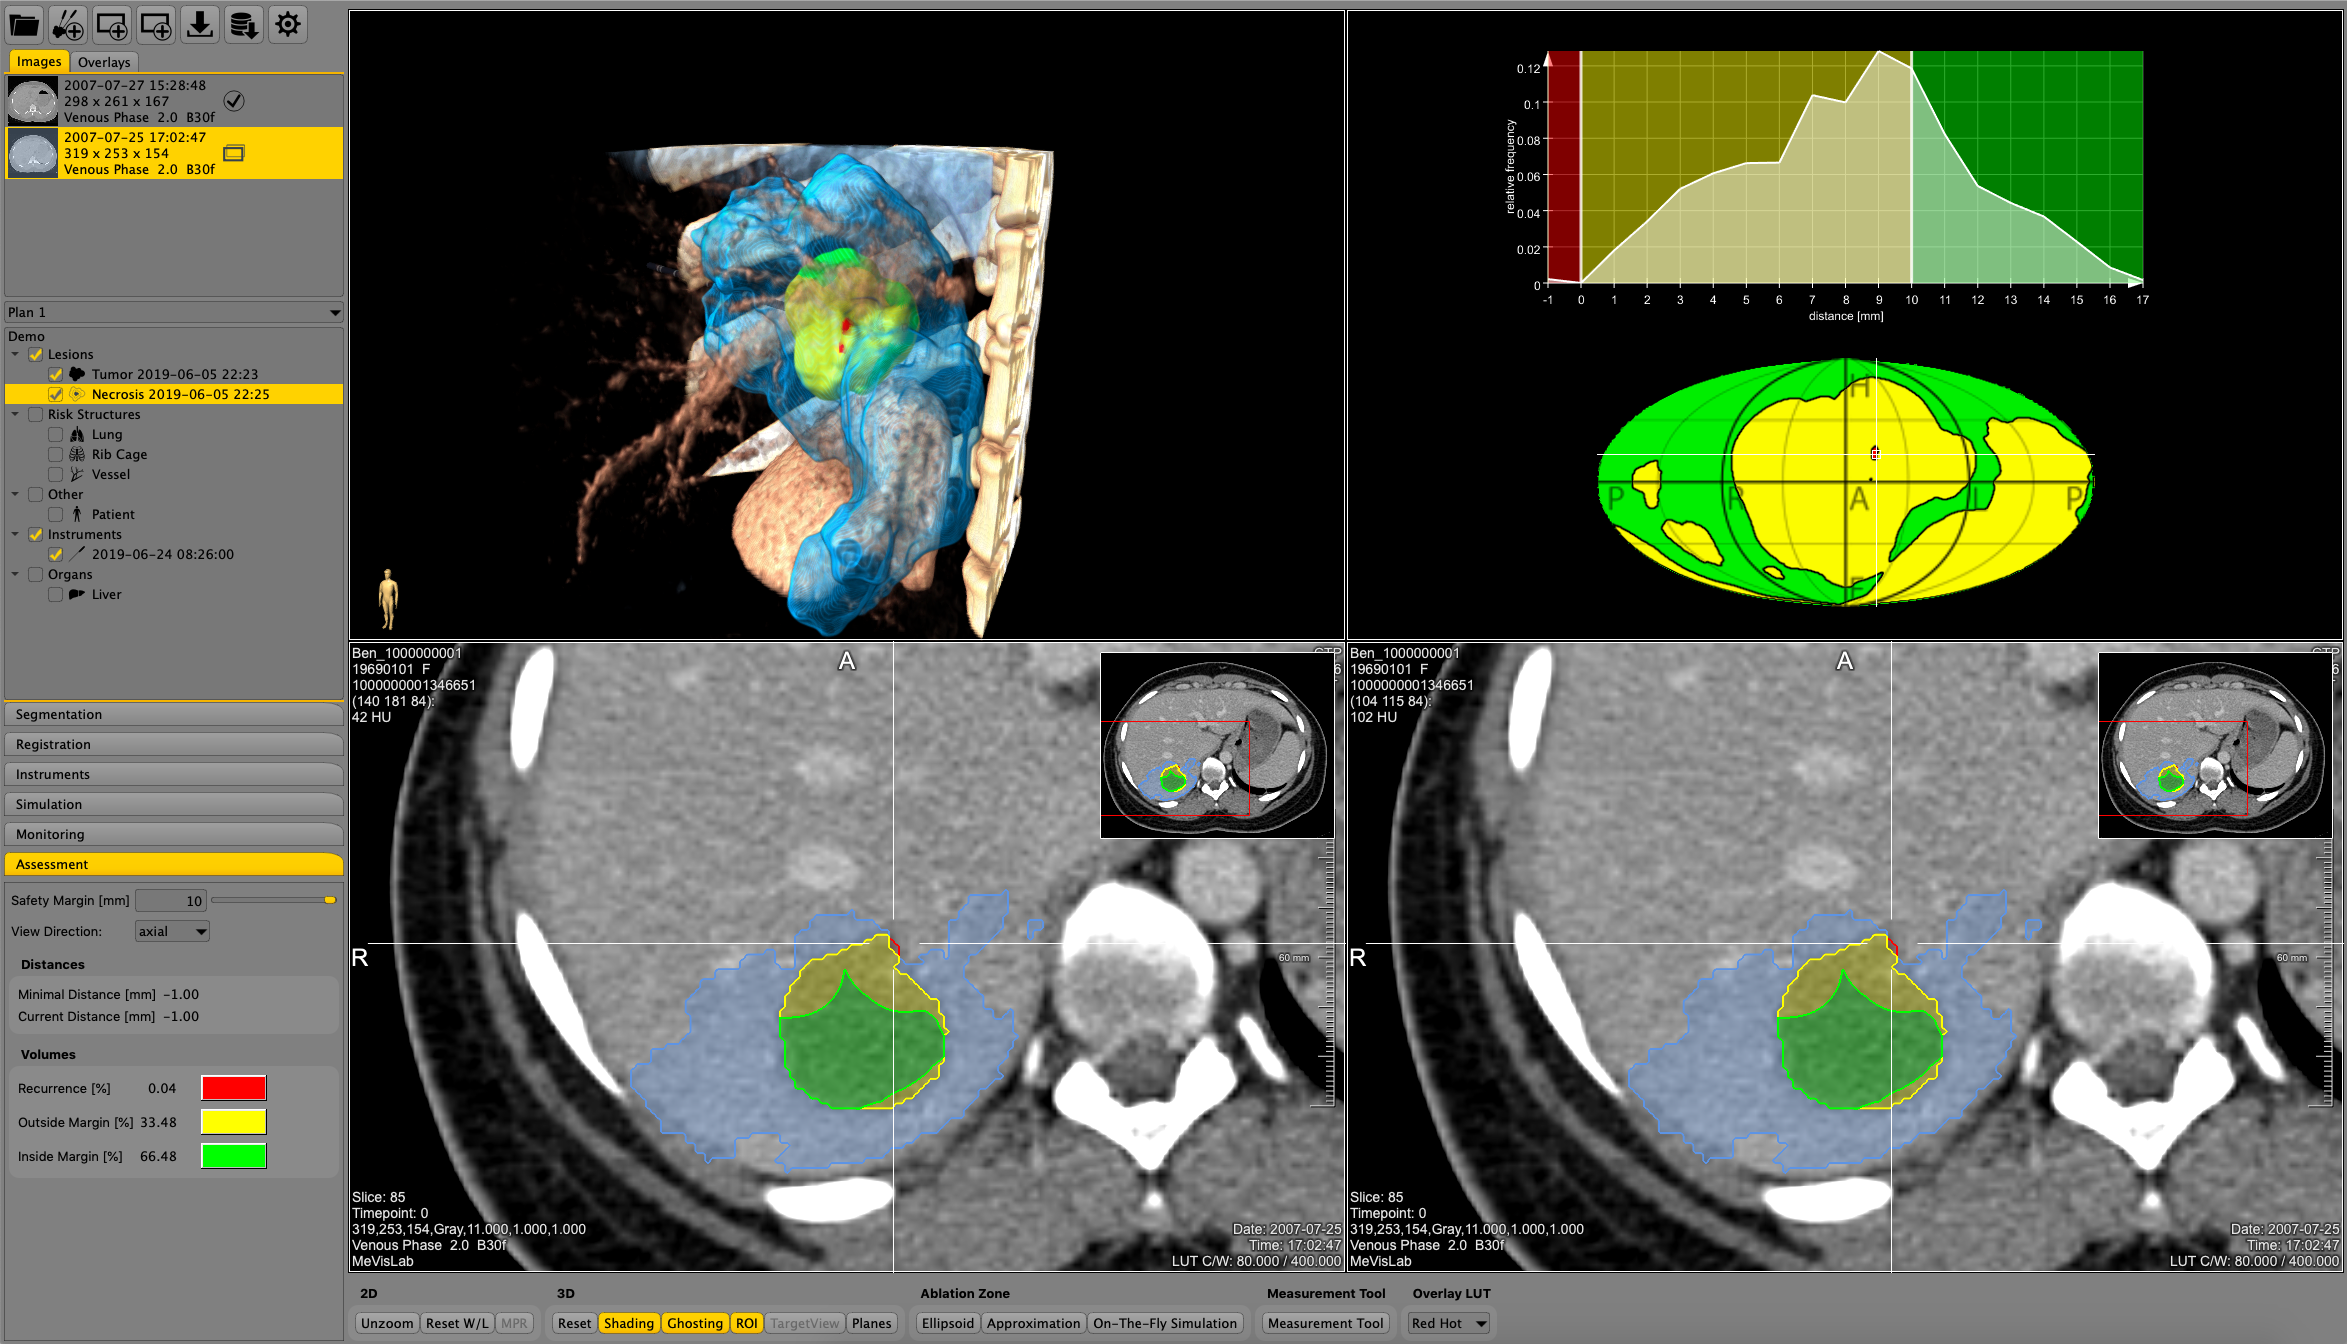 The software assistant for interventional radiology (SAFIR) helps assessing the risk for recurrences by comparing pre- and post-interventional images through image registration and display of safety margins by a traffic light color scheme.